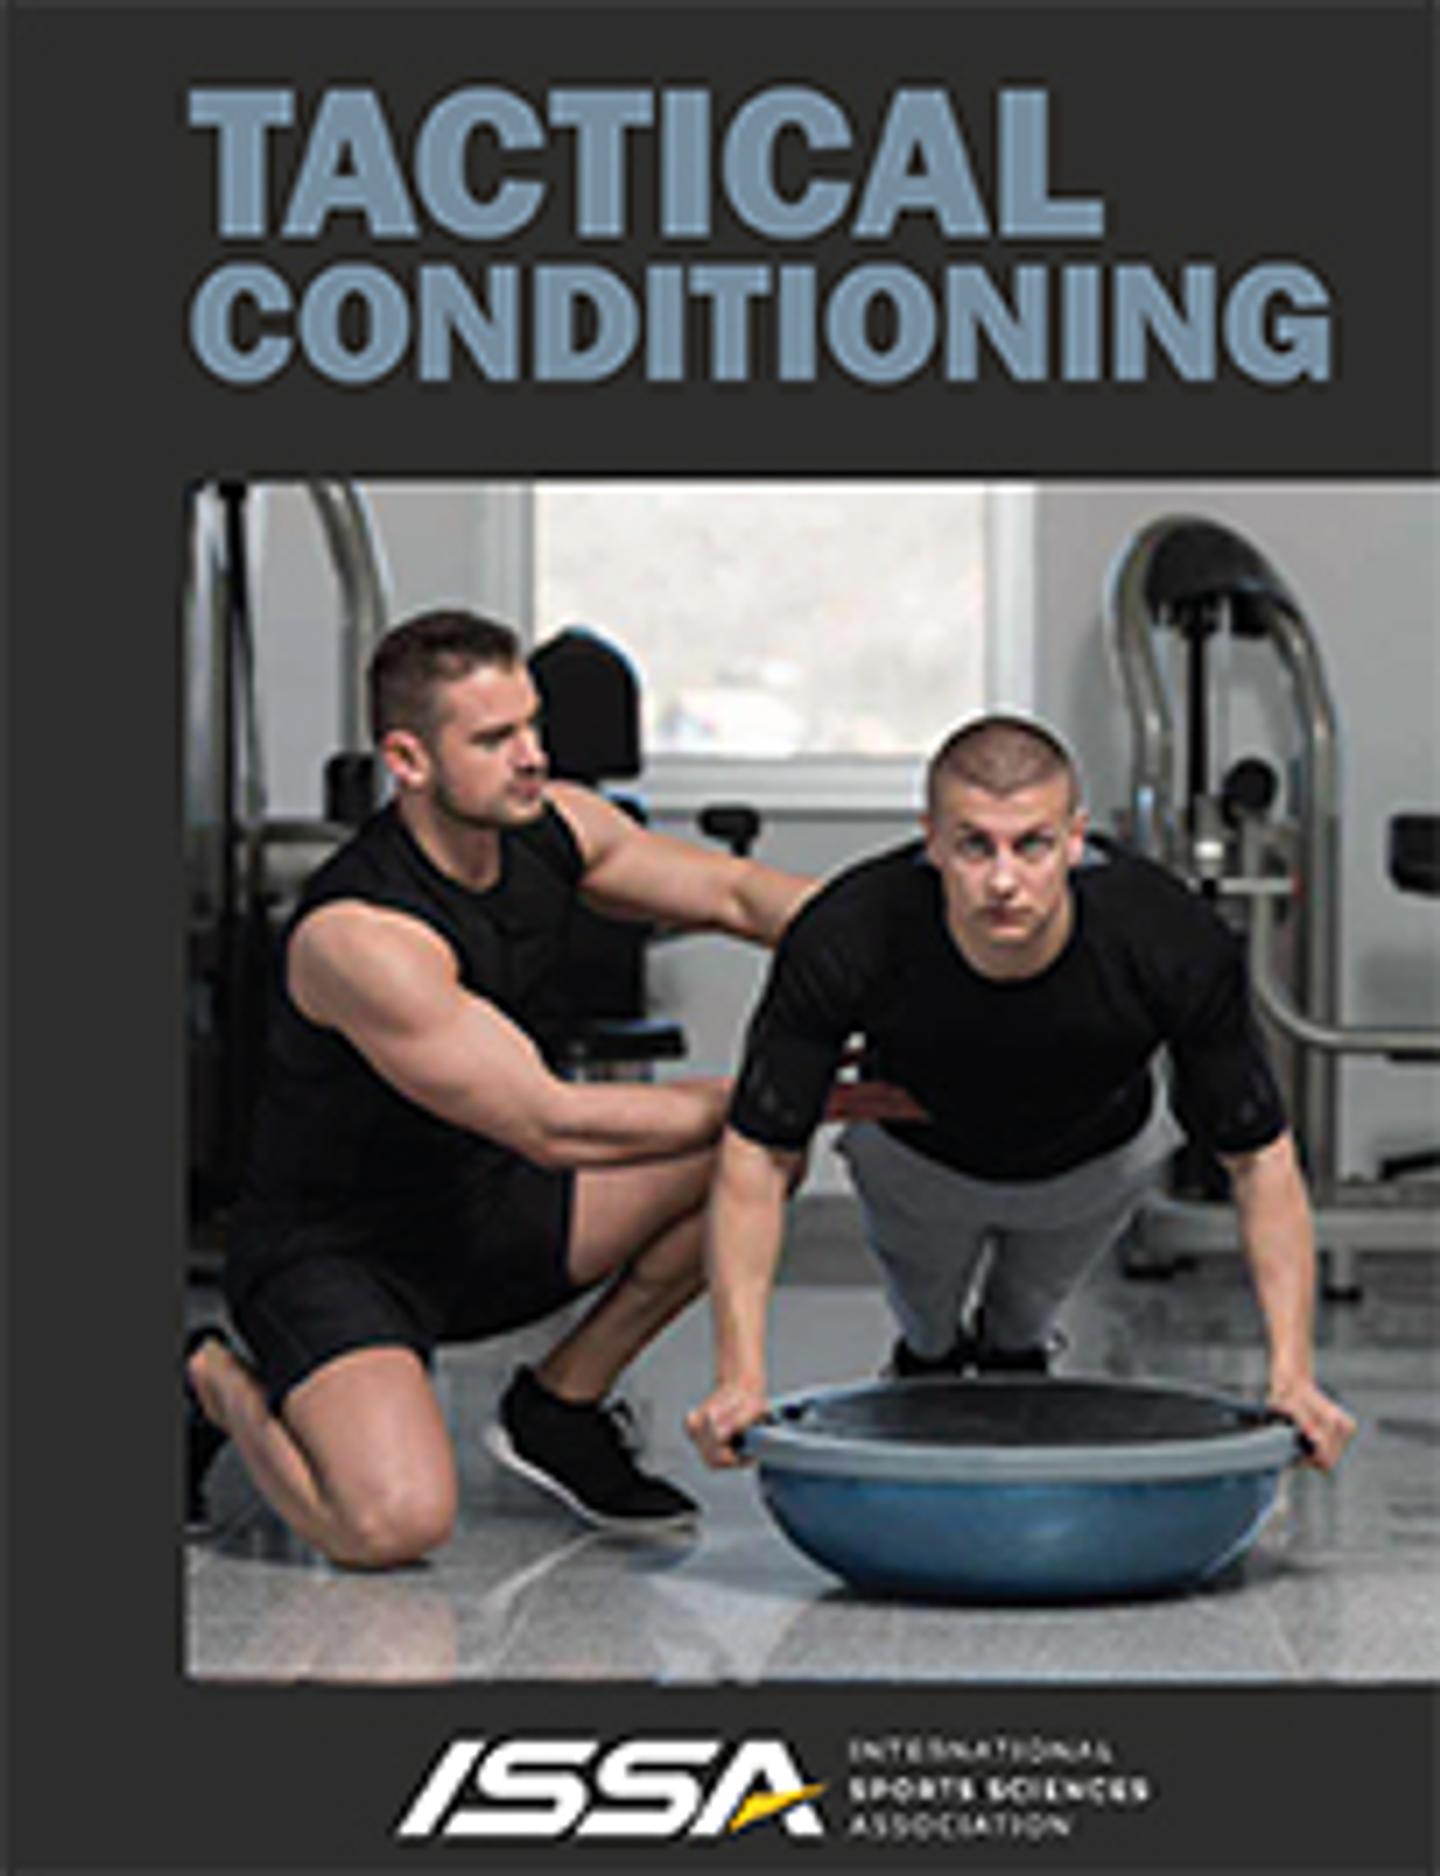 Tactical Conditioning Specialist Course Guide